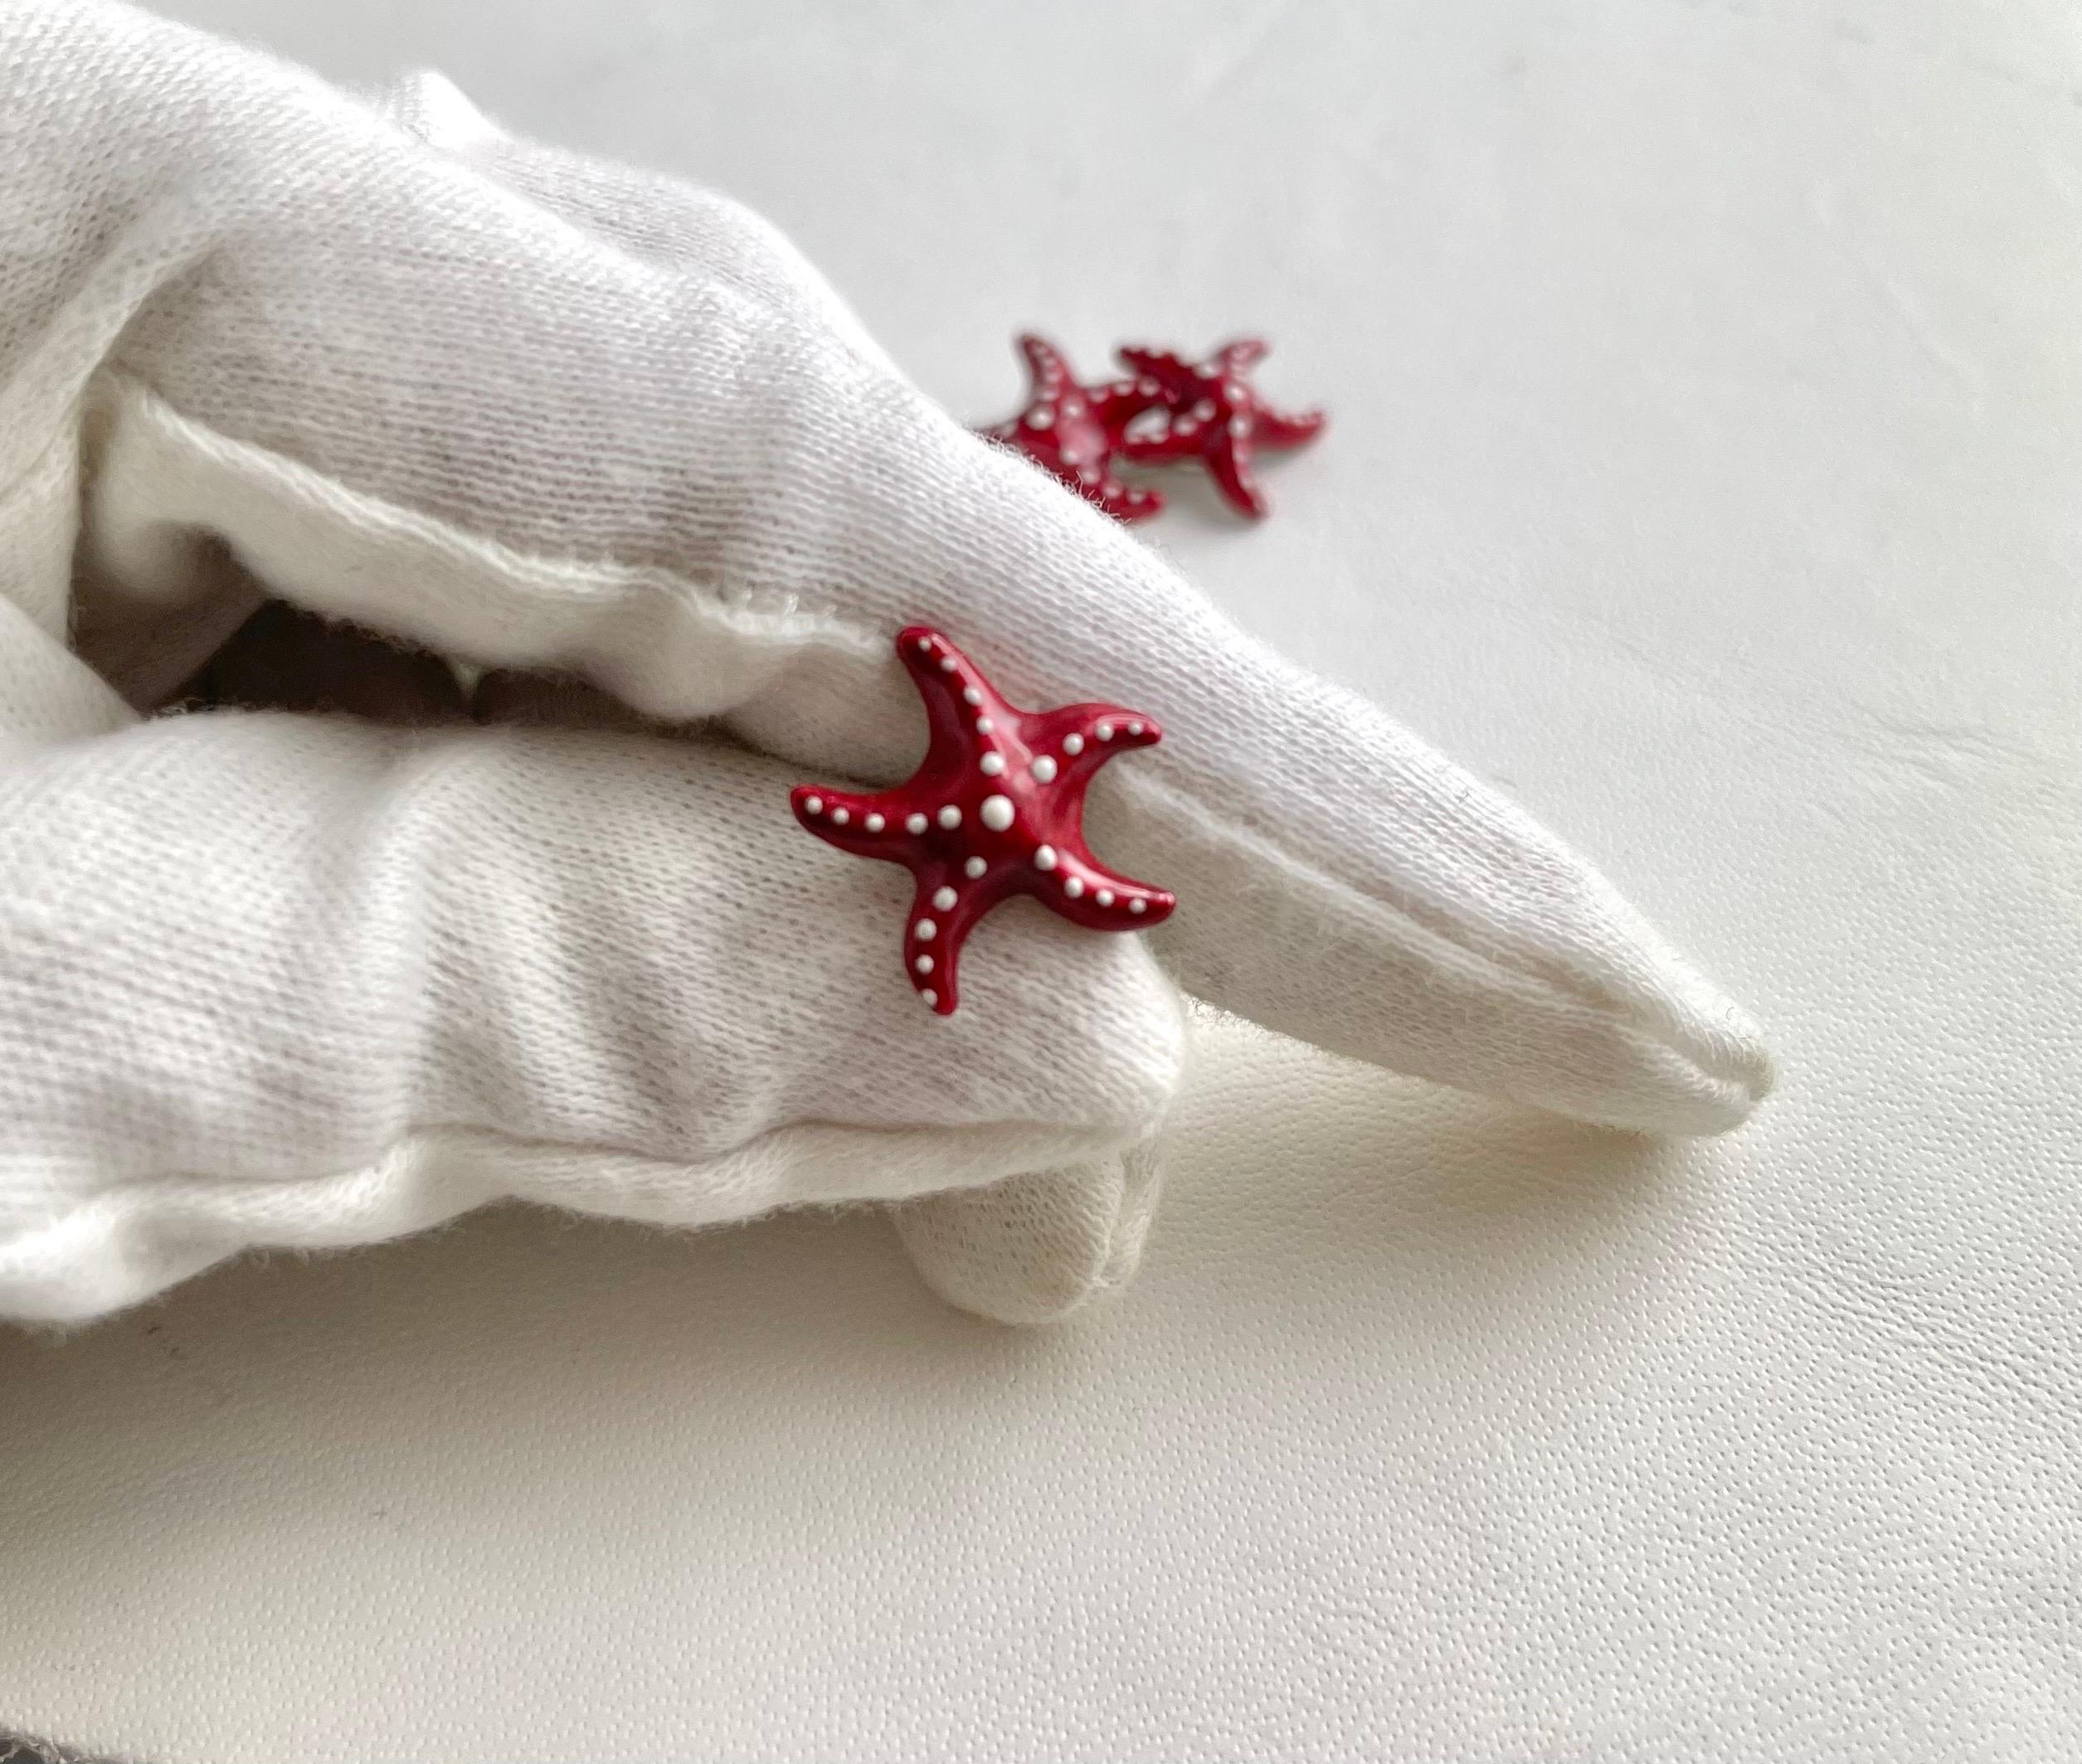 The striking red shade of this enamel illuminated and adorned by white  dot  is the protagonist of this playful pair of cufflinks, shaped as sea stars and made in sterling silver 925. 

Measurements: 
Bigger stars 0.67  inches  circa  
Smallest